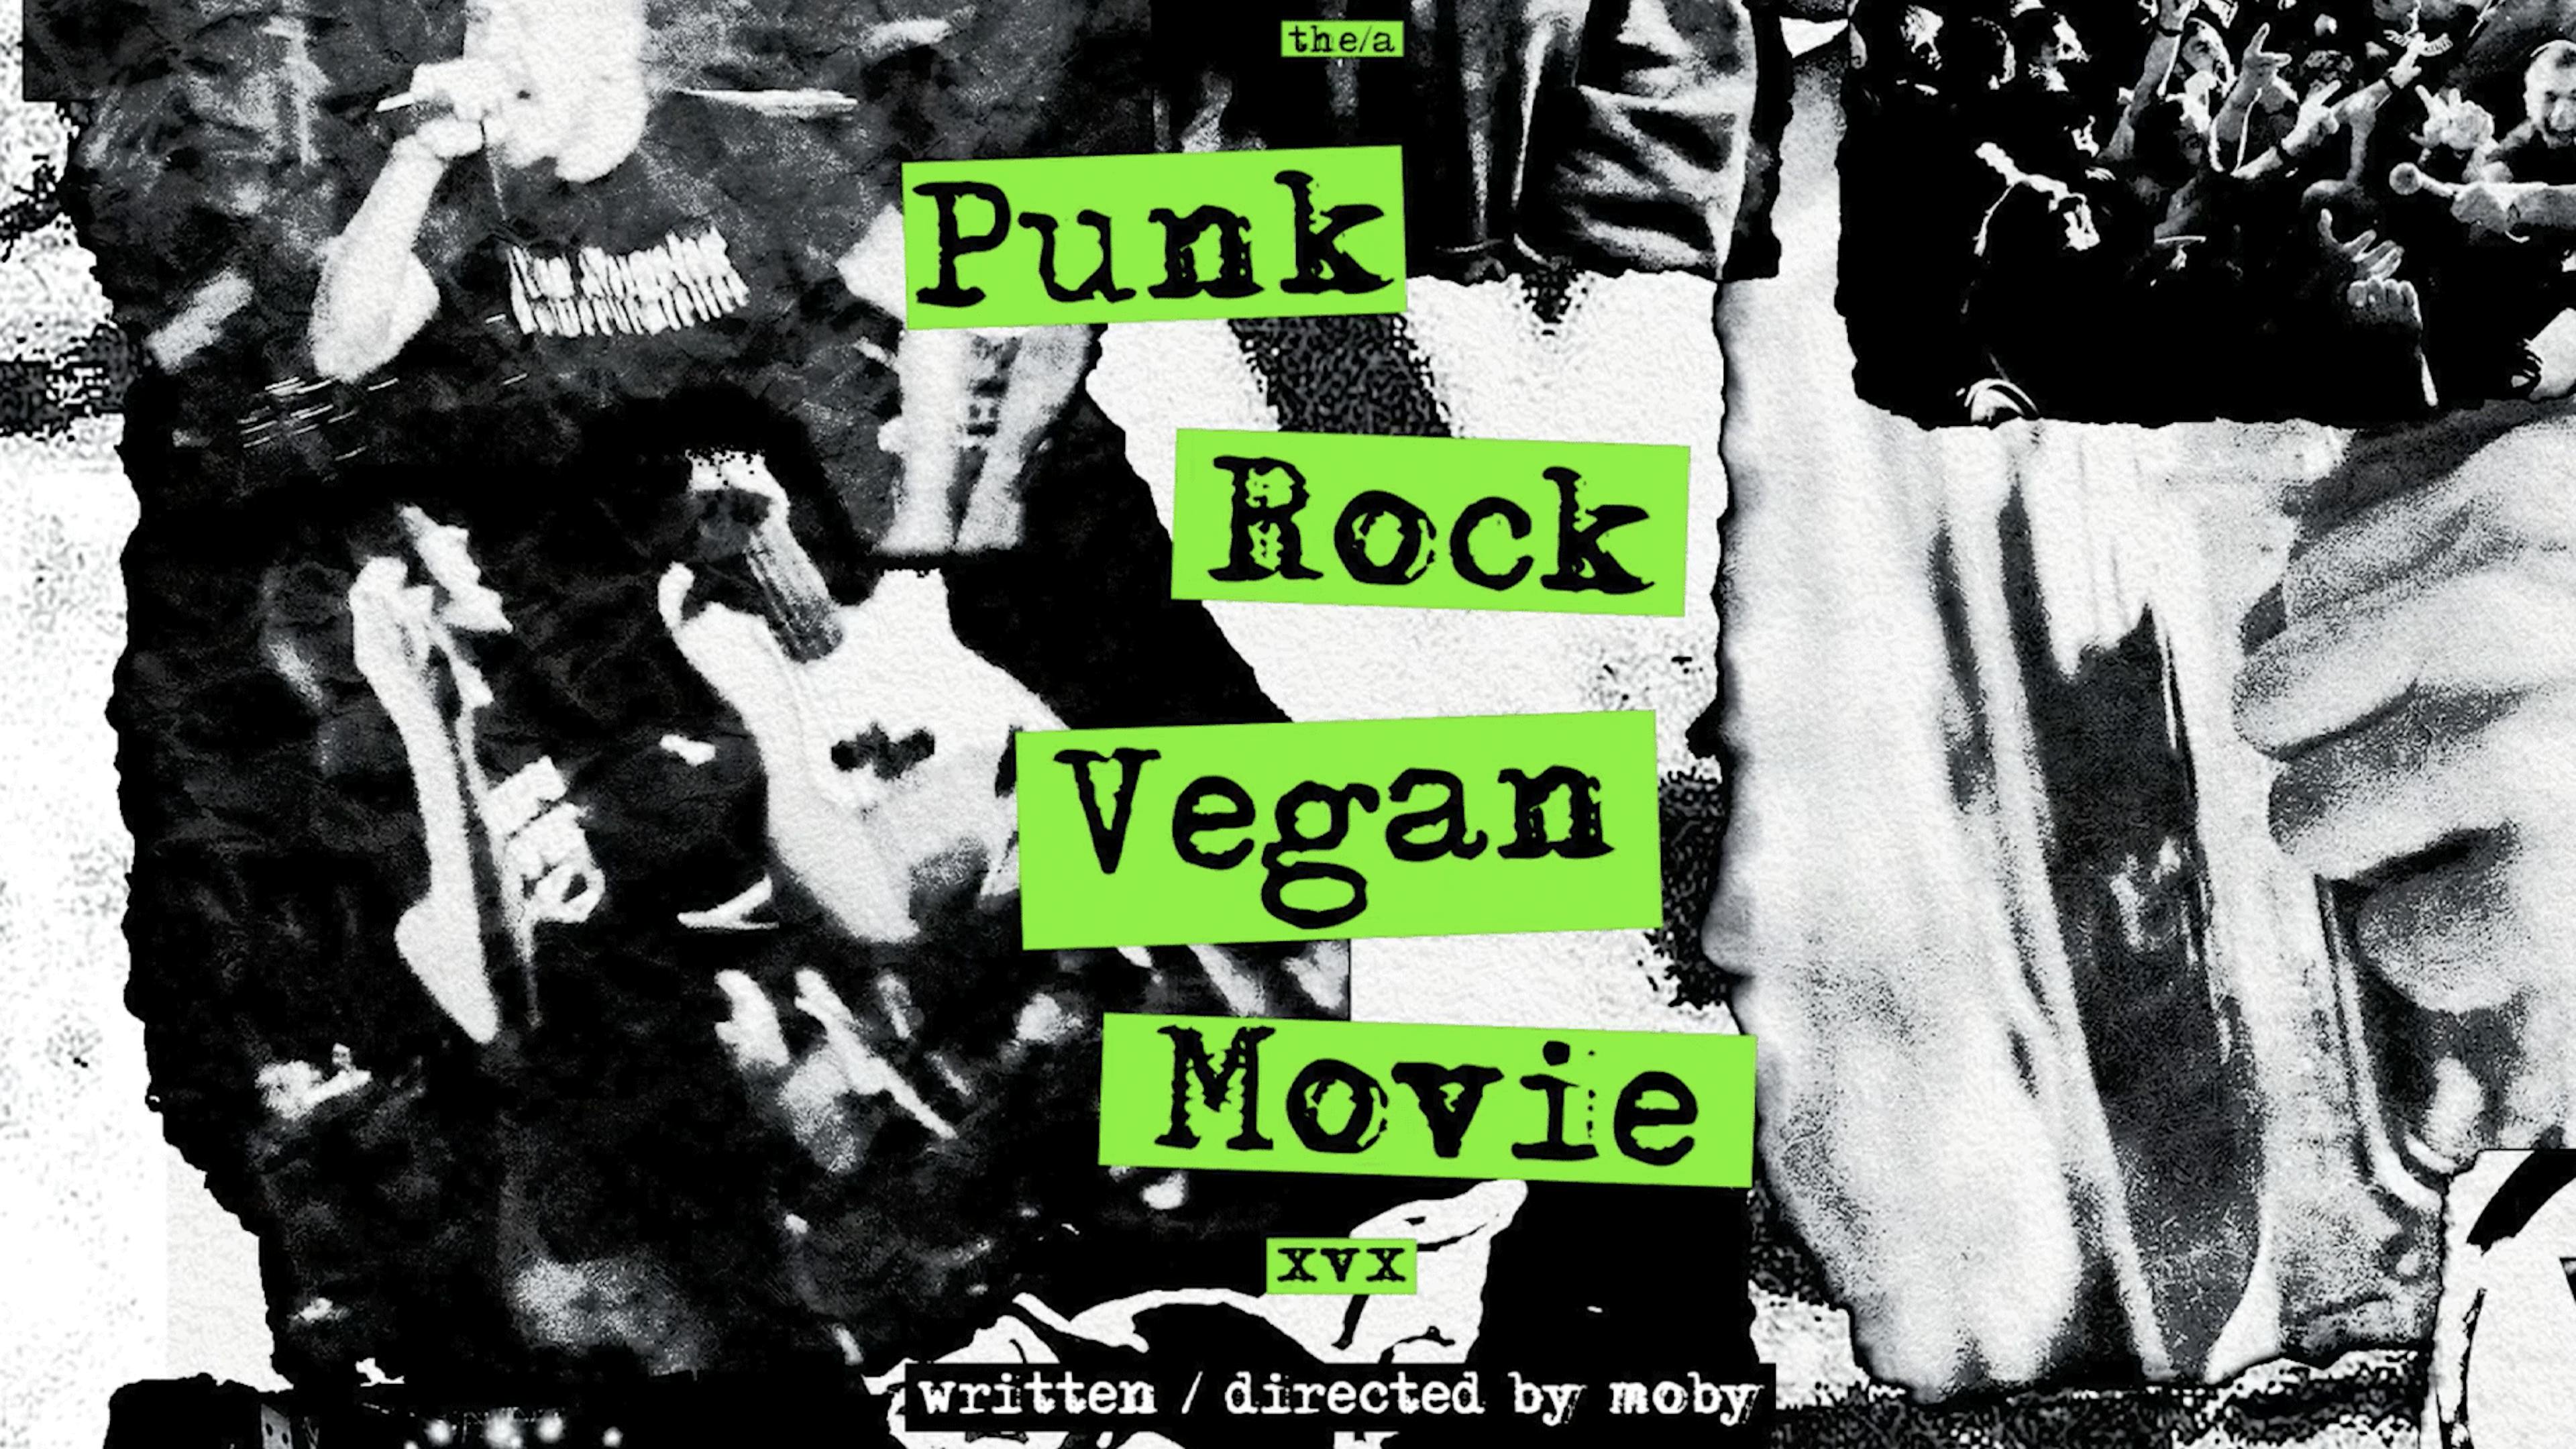 Moby’s Punk Rock Vegan Movie to premiere at Slamdance this month